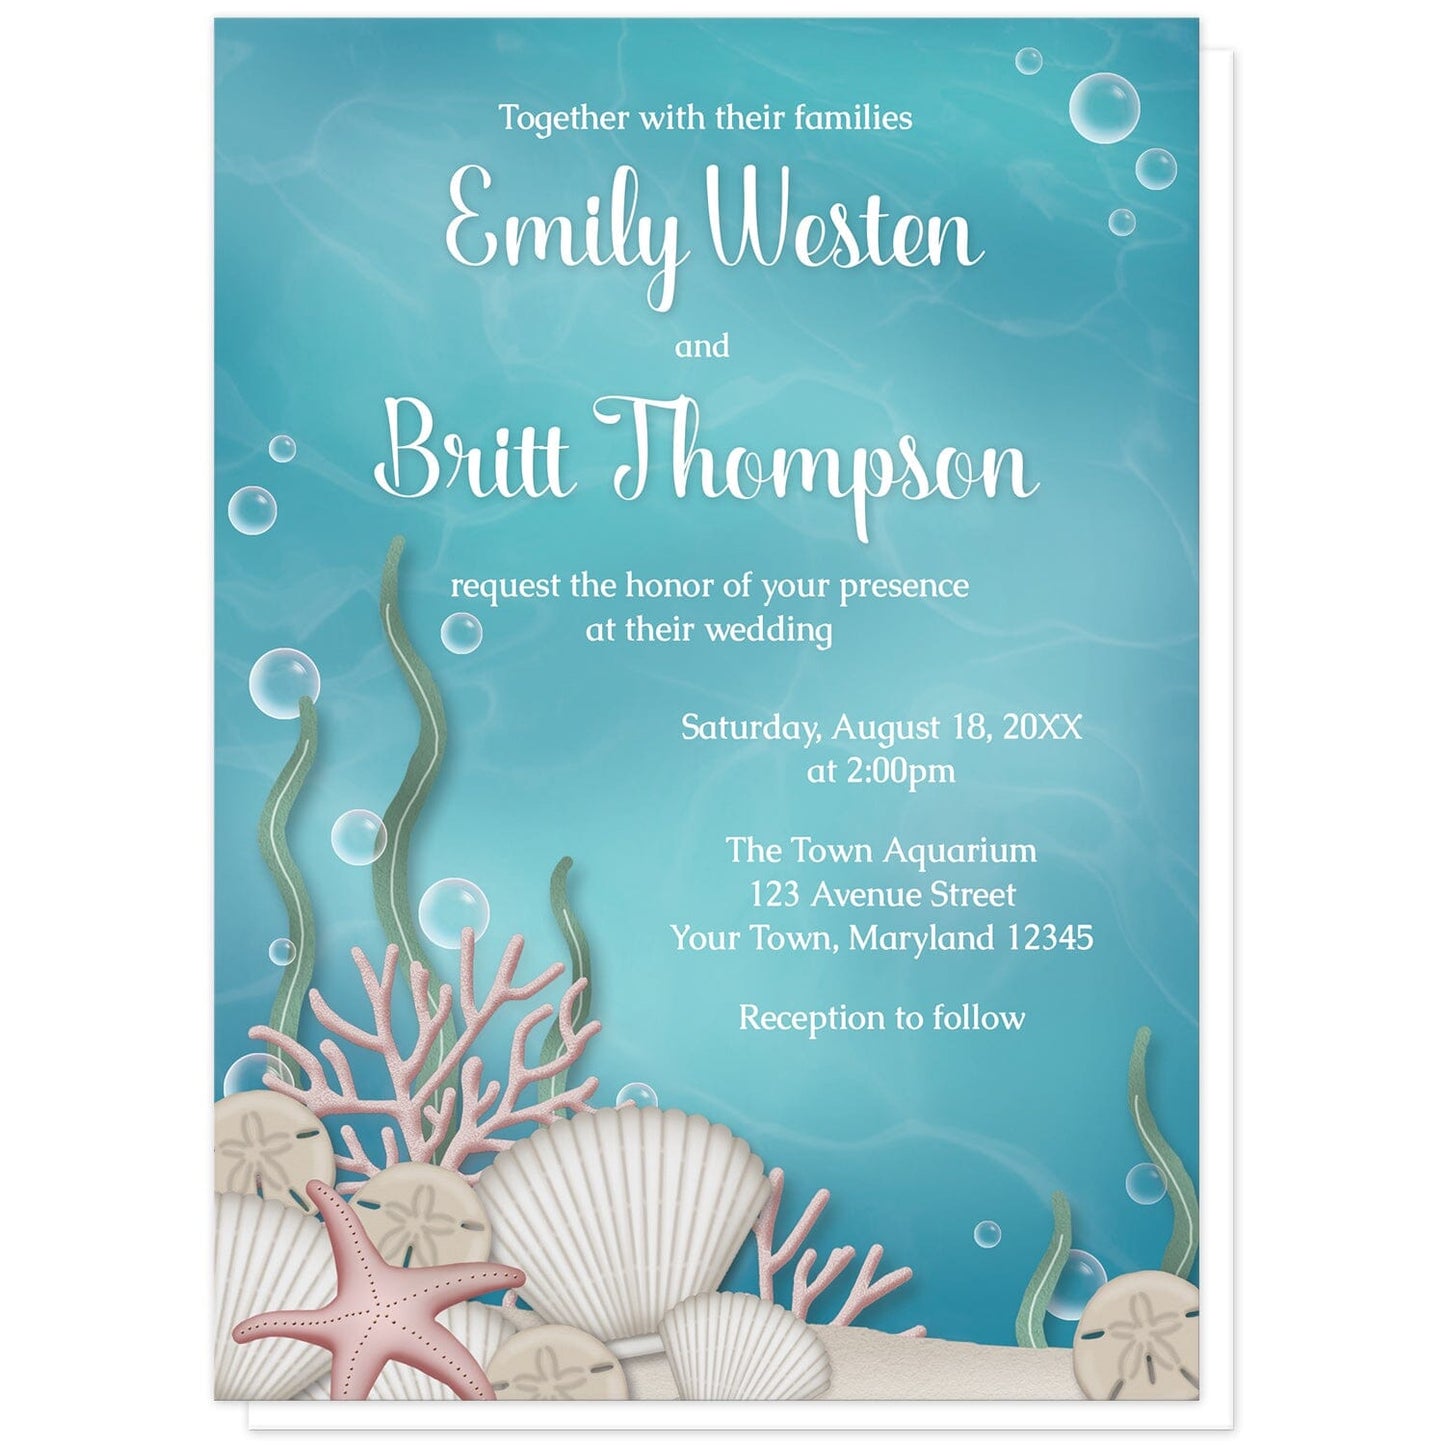 Whimsical Under the Sea Wedding Invitations at Artistically Invited. Uniquely illustrated whimsical under the sea wedding invitations designed with a sandy seabed, assorted seashells, coral, kelp, and little bubbles over an aqua blue water background. Your personalized marriage celebration details are custom printed in white over the underwater background.